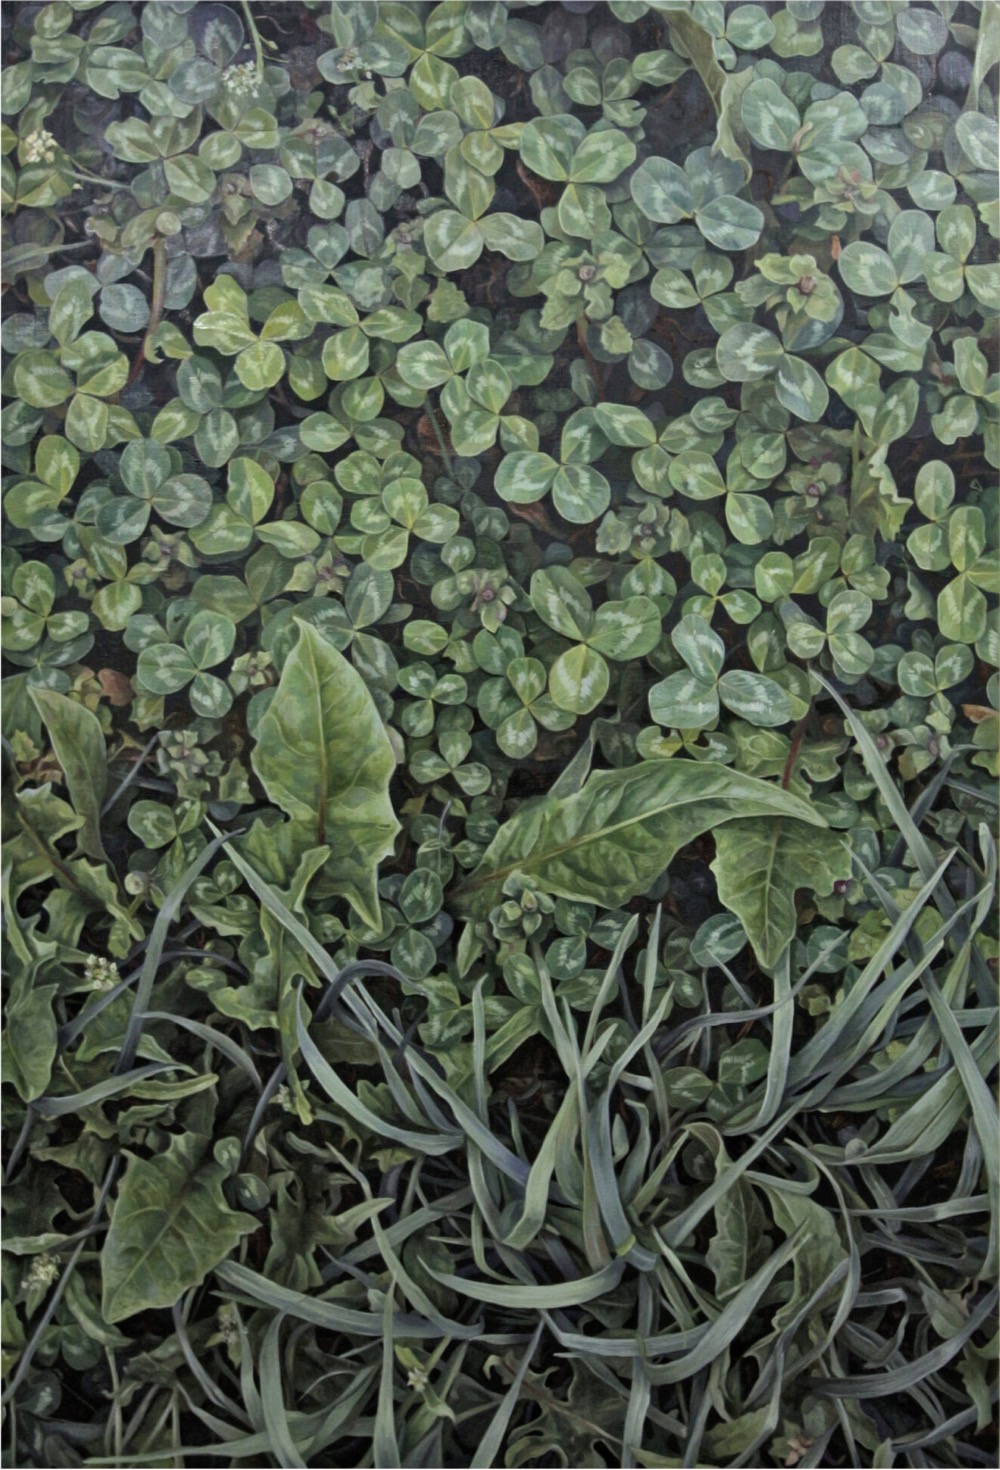 hyperrealistic painting of grasses and leaves